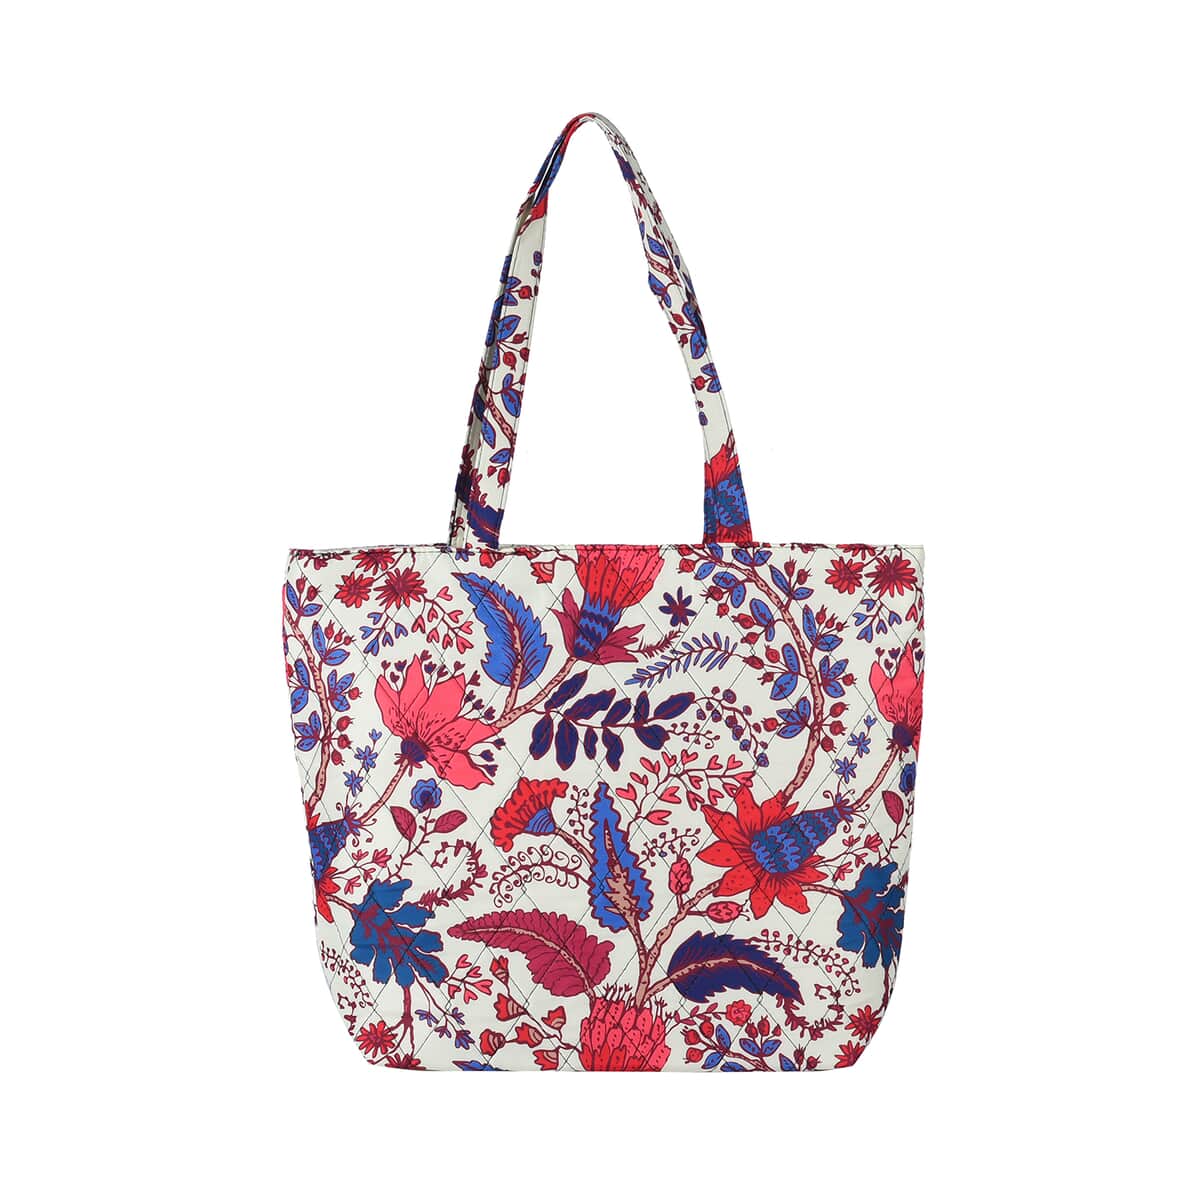 Beige and Mulit Color Flower Pattern Tote Bag (17"x4.5"x13.5") image number 0